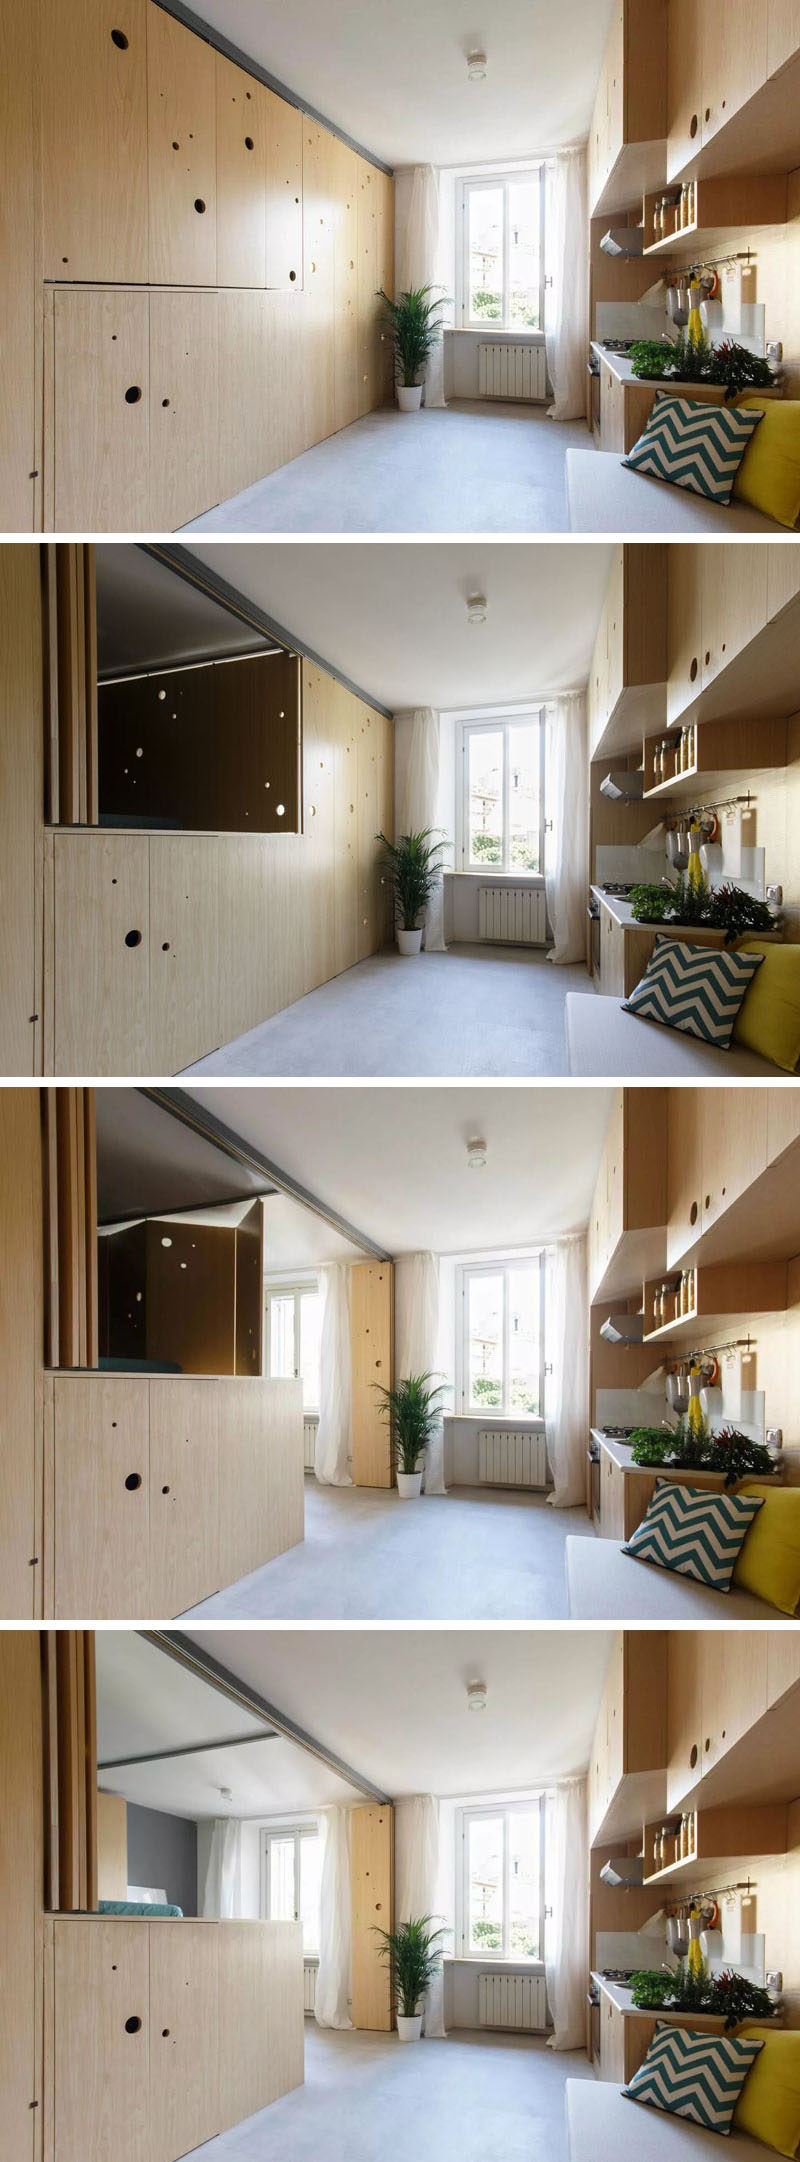 This tiny apartment has a wall that opens up to reveal the bedroom and dining room.